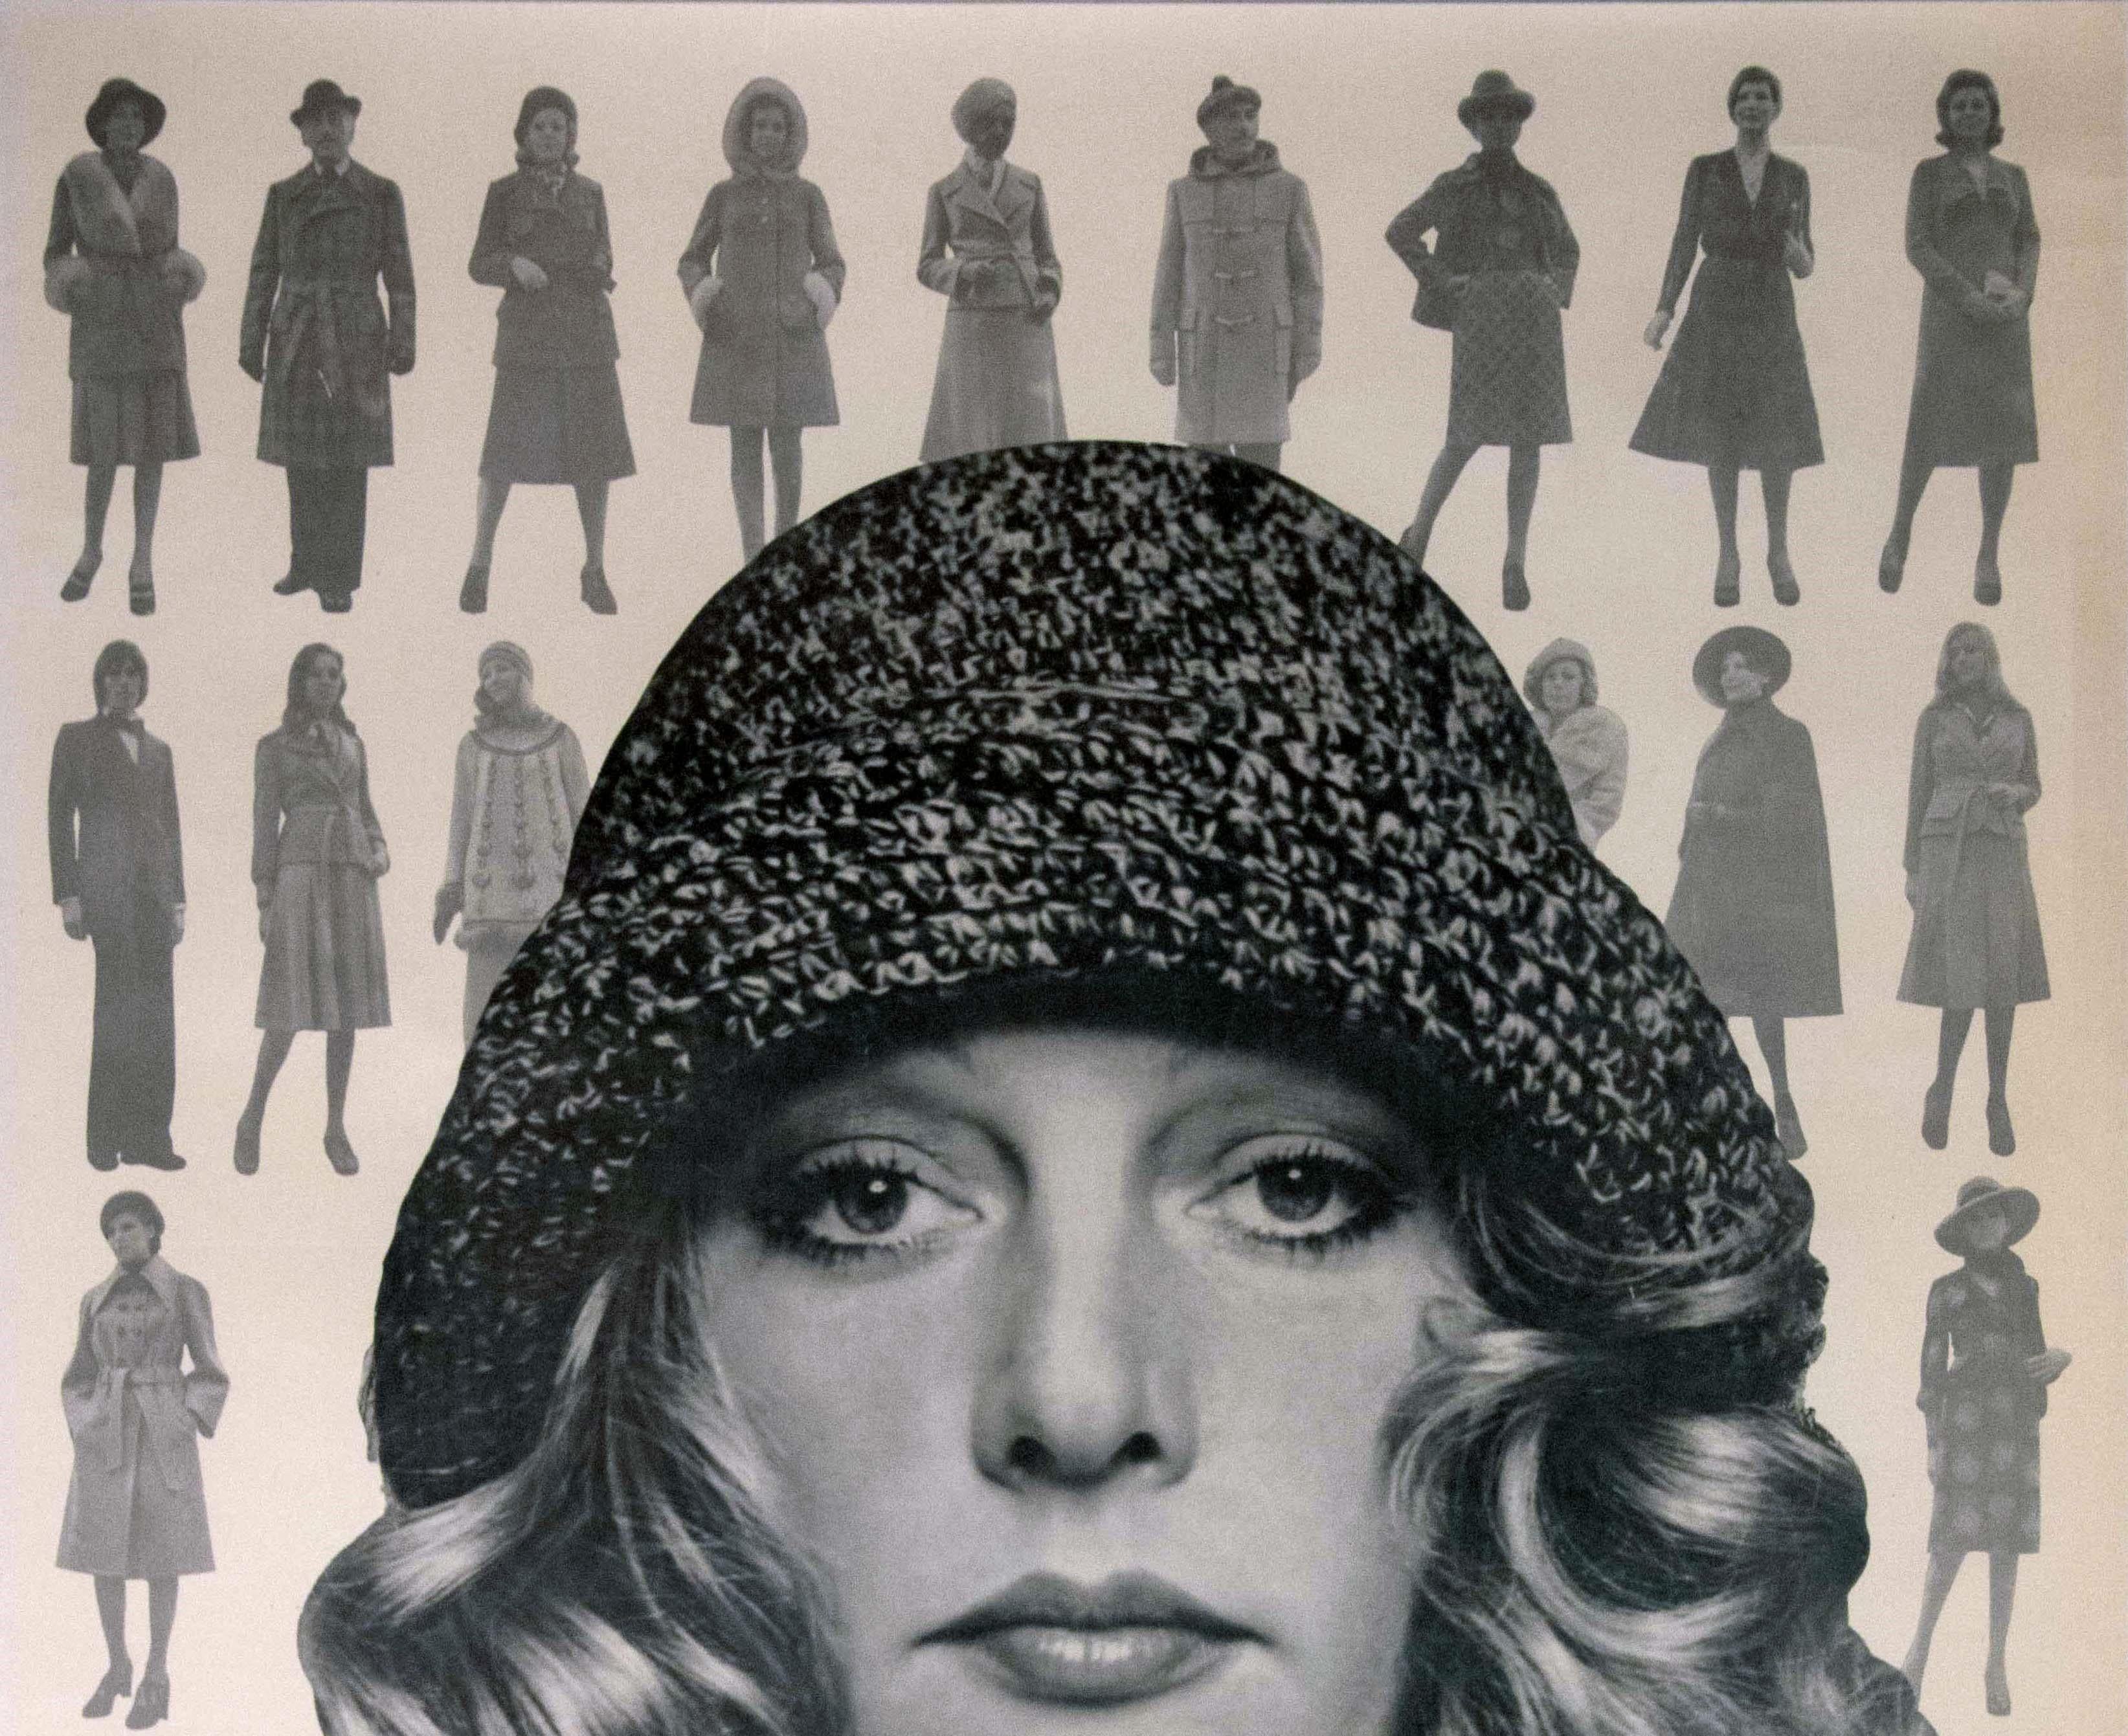 Original vintage Soviet advertising poster for the Leningrad Fashion House at 21 Nevsky Prospect - ????????????? ??? ??????? ?????? ???? ??????? ???????? 21 - featuring a black and white photograph of a model in a knitted hat and scarf with men in